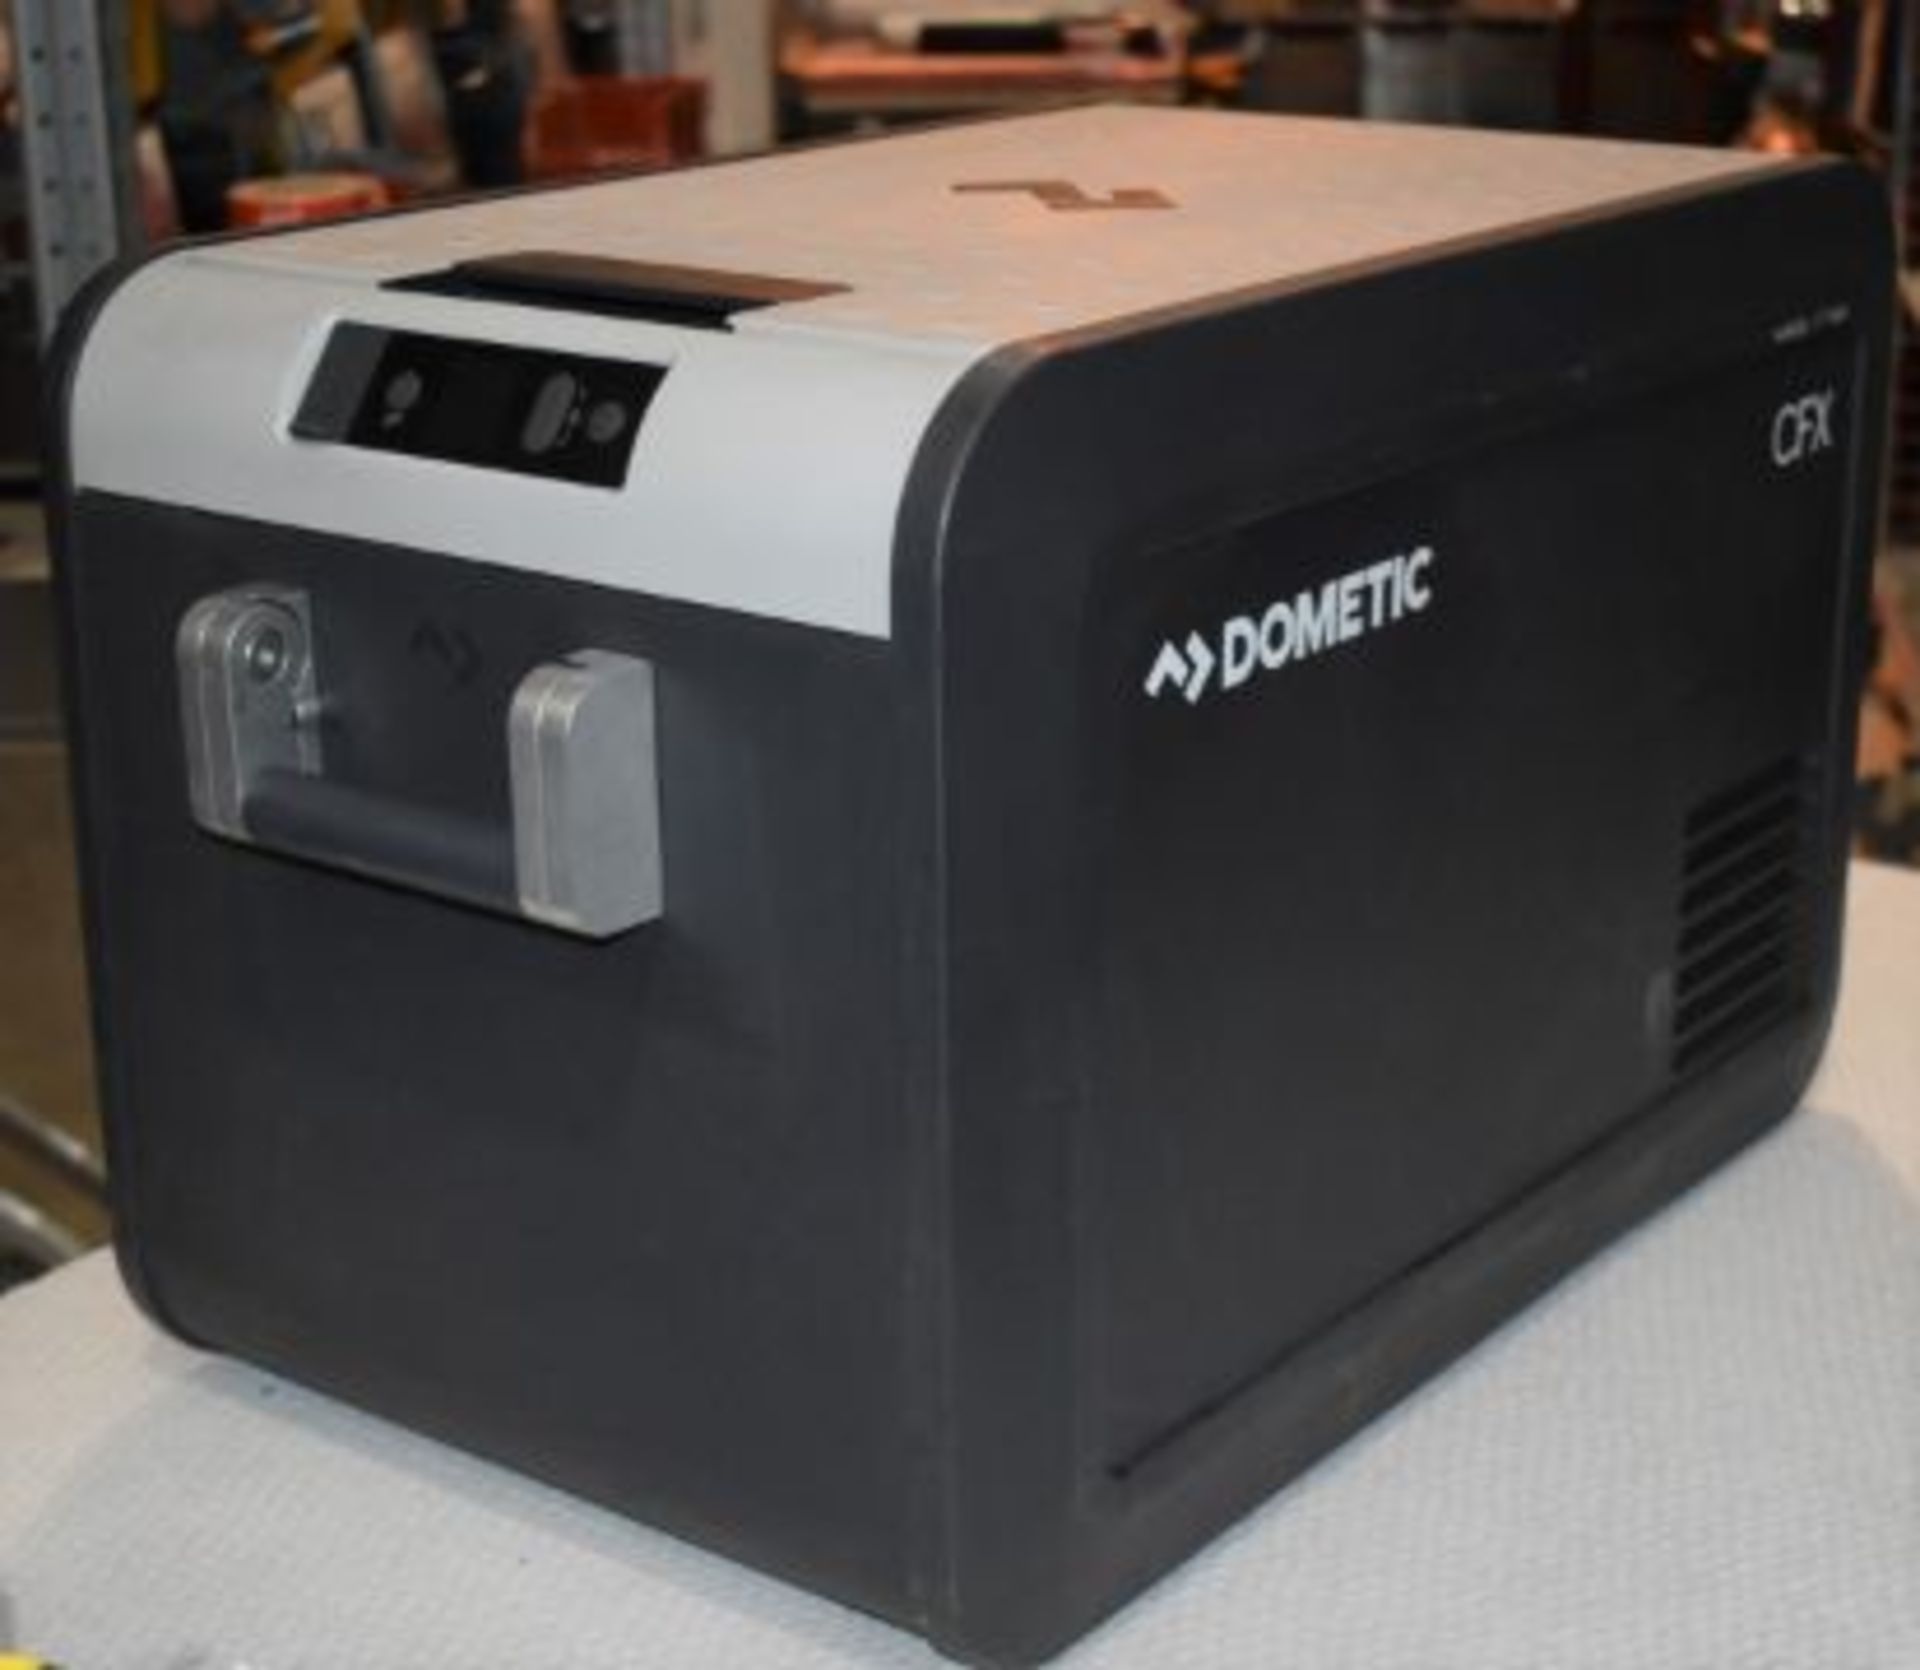 1 x Dometic CFX3 35 Portable 32l Compressor Cooler and Freezer - Perfect For Cooling The Christmas - Image 8 of 9